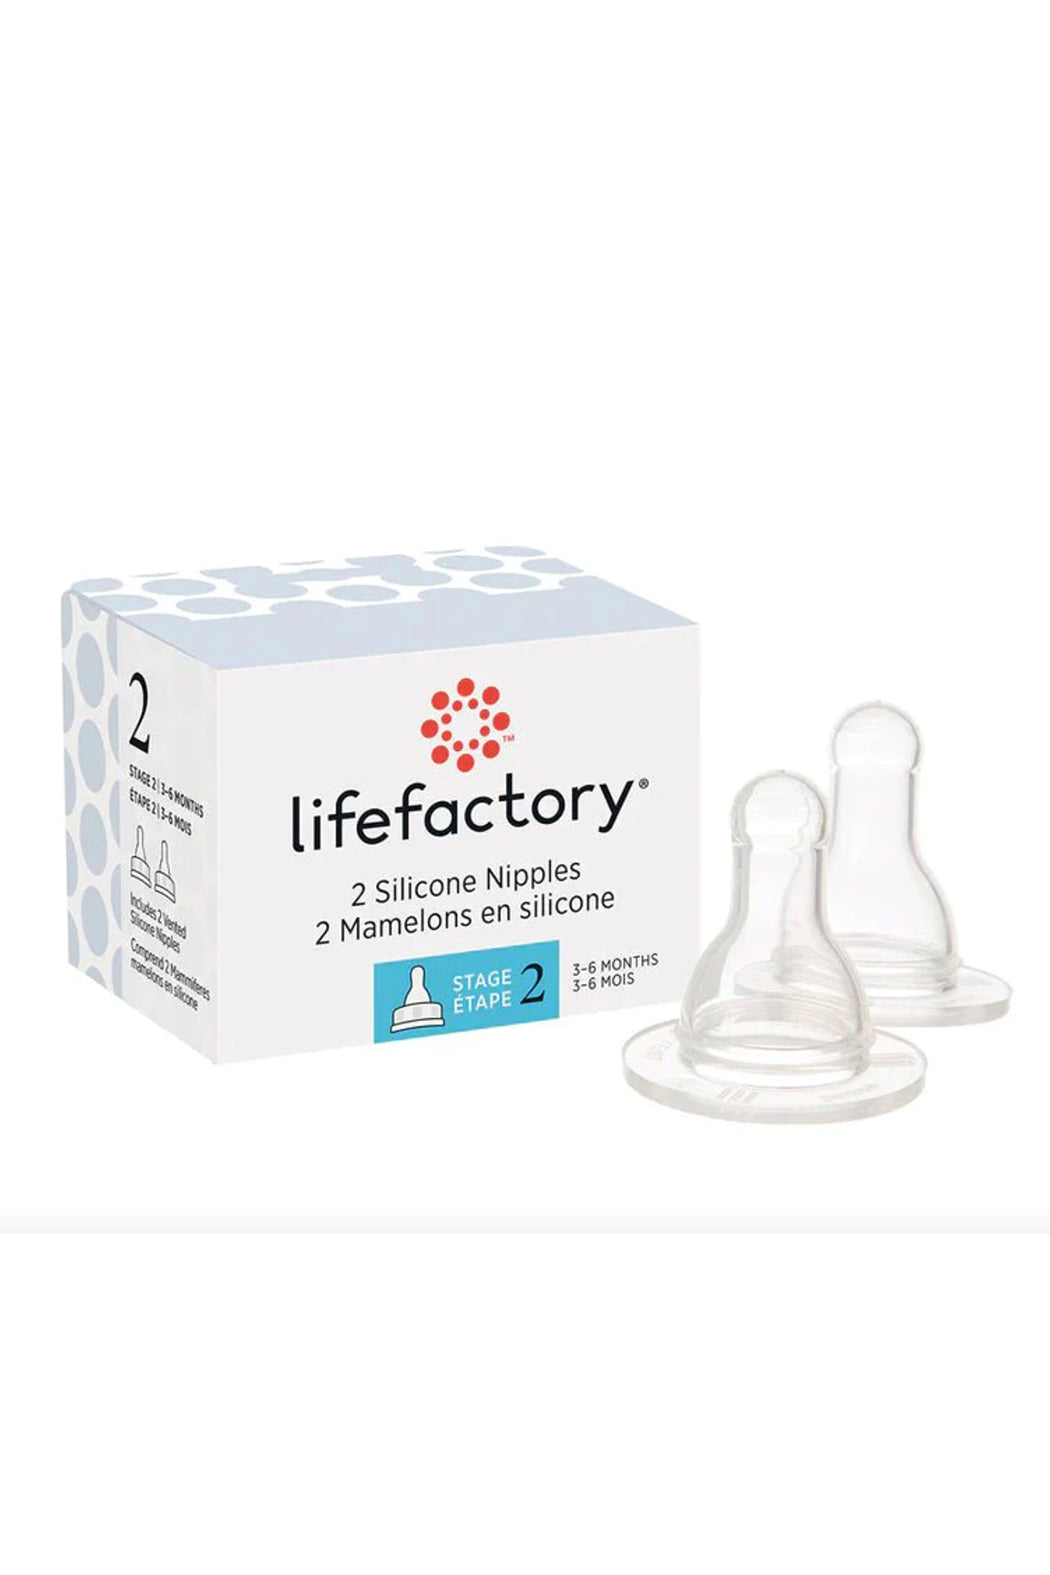 Lifefactory Silicone Nipple - Wide Neck